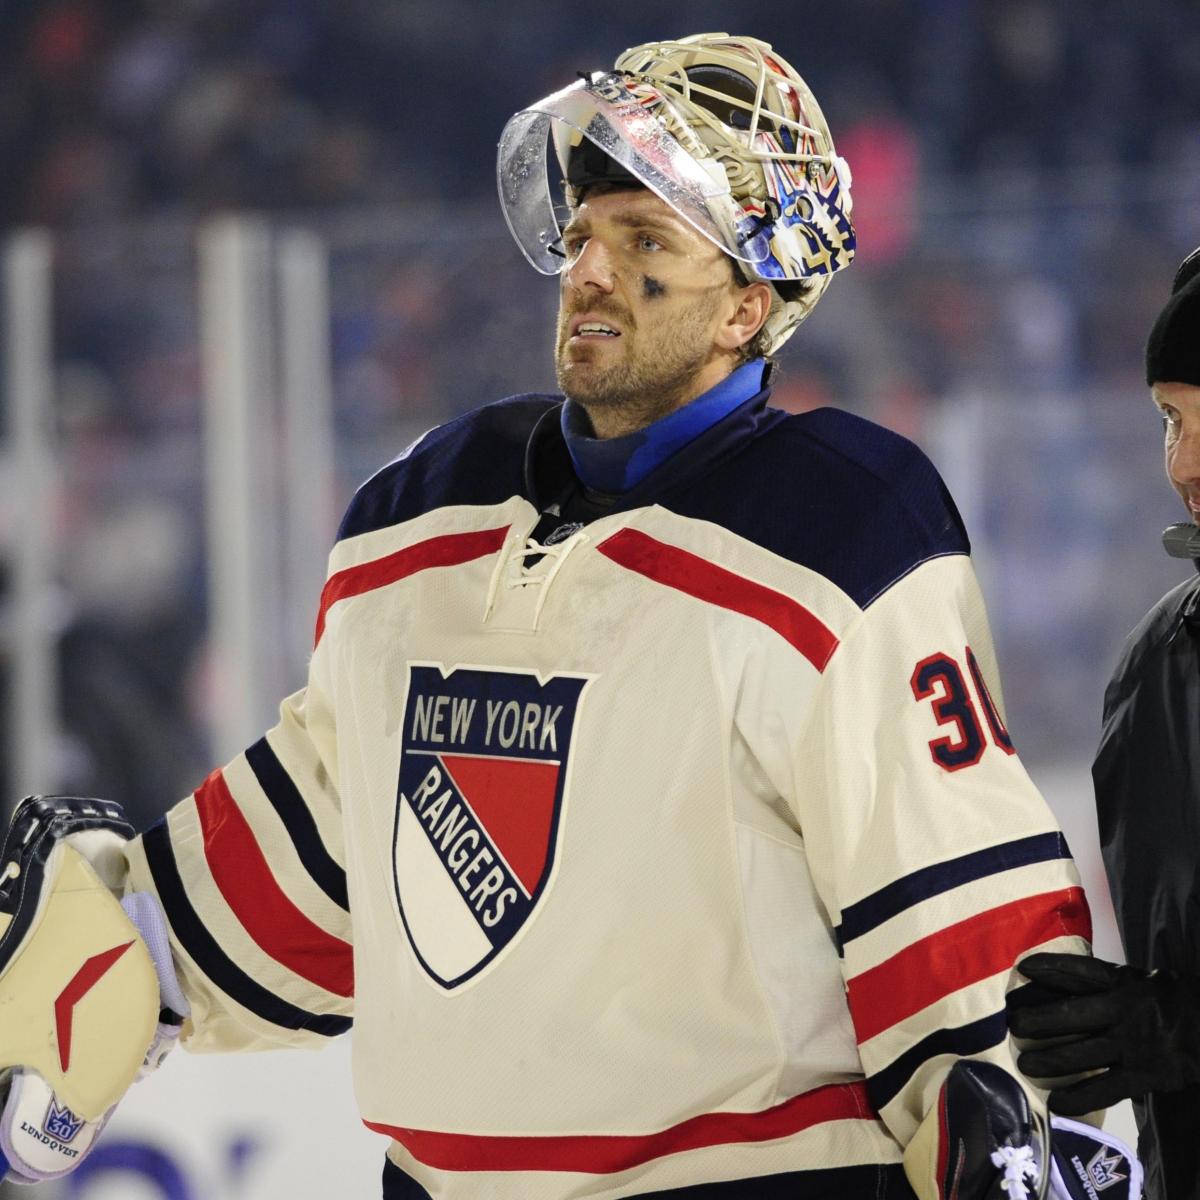 New York Rangers Liberty jersey is back but how much did it change?